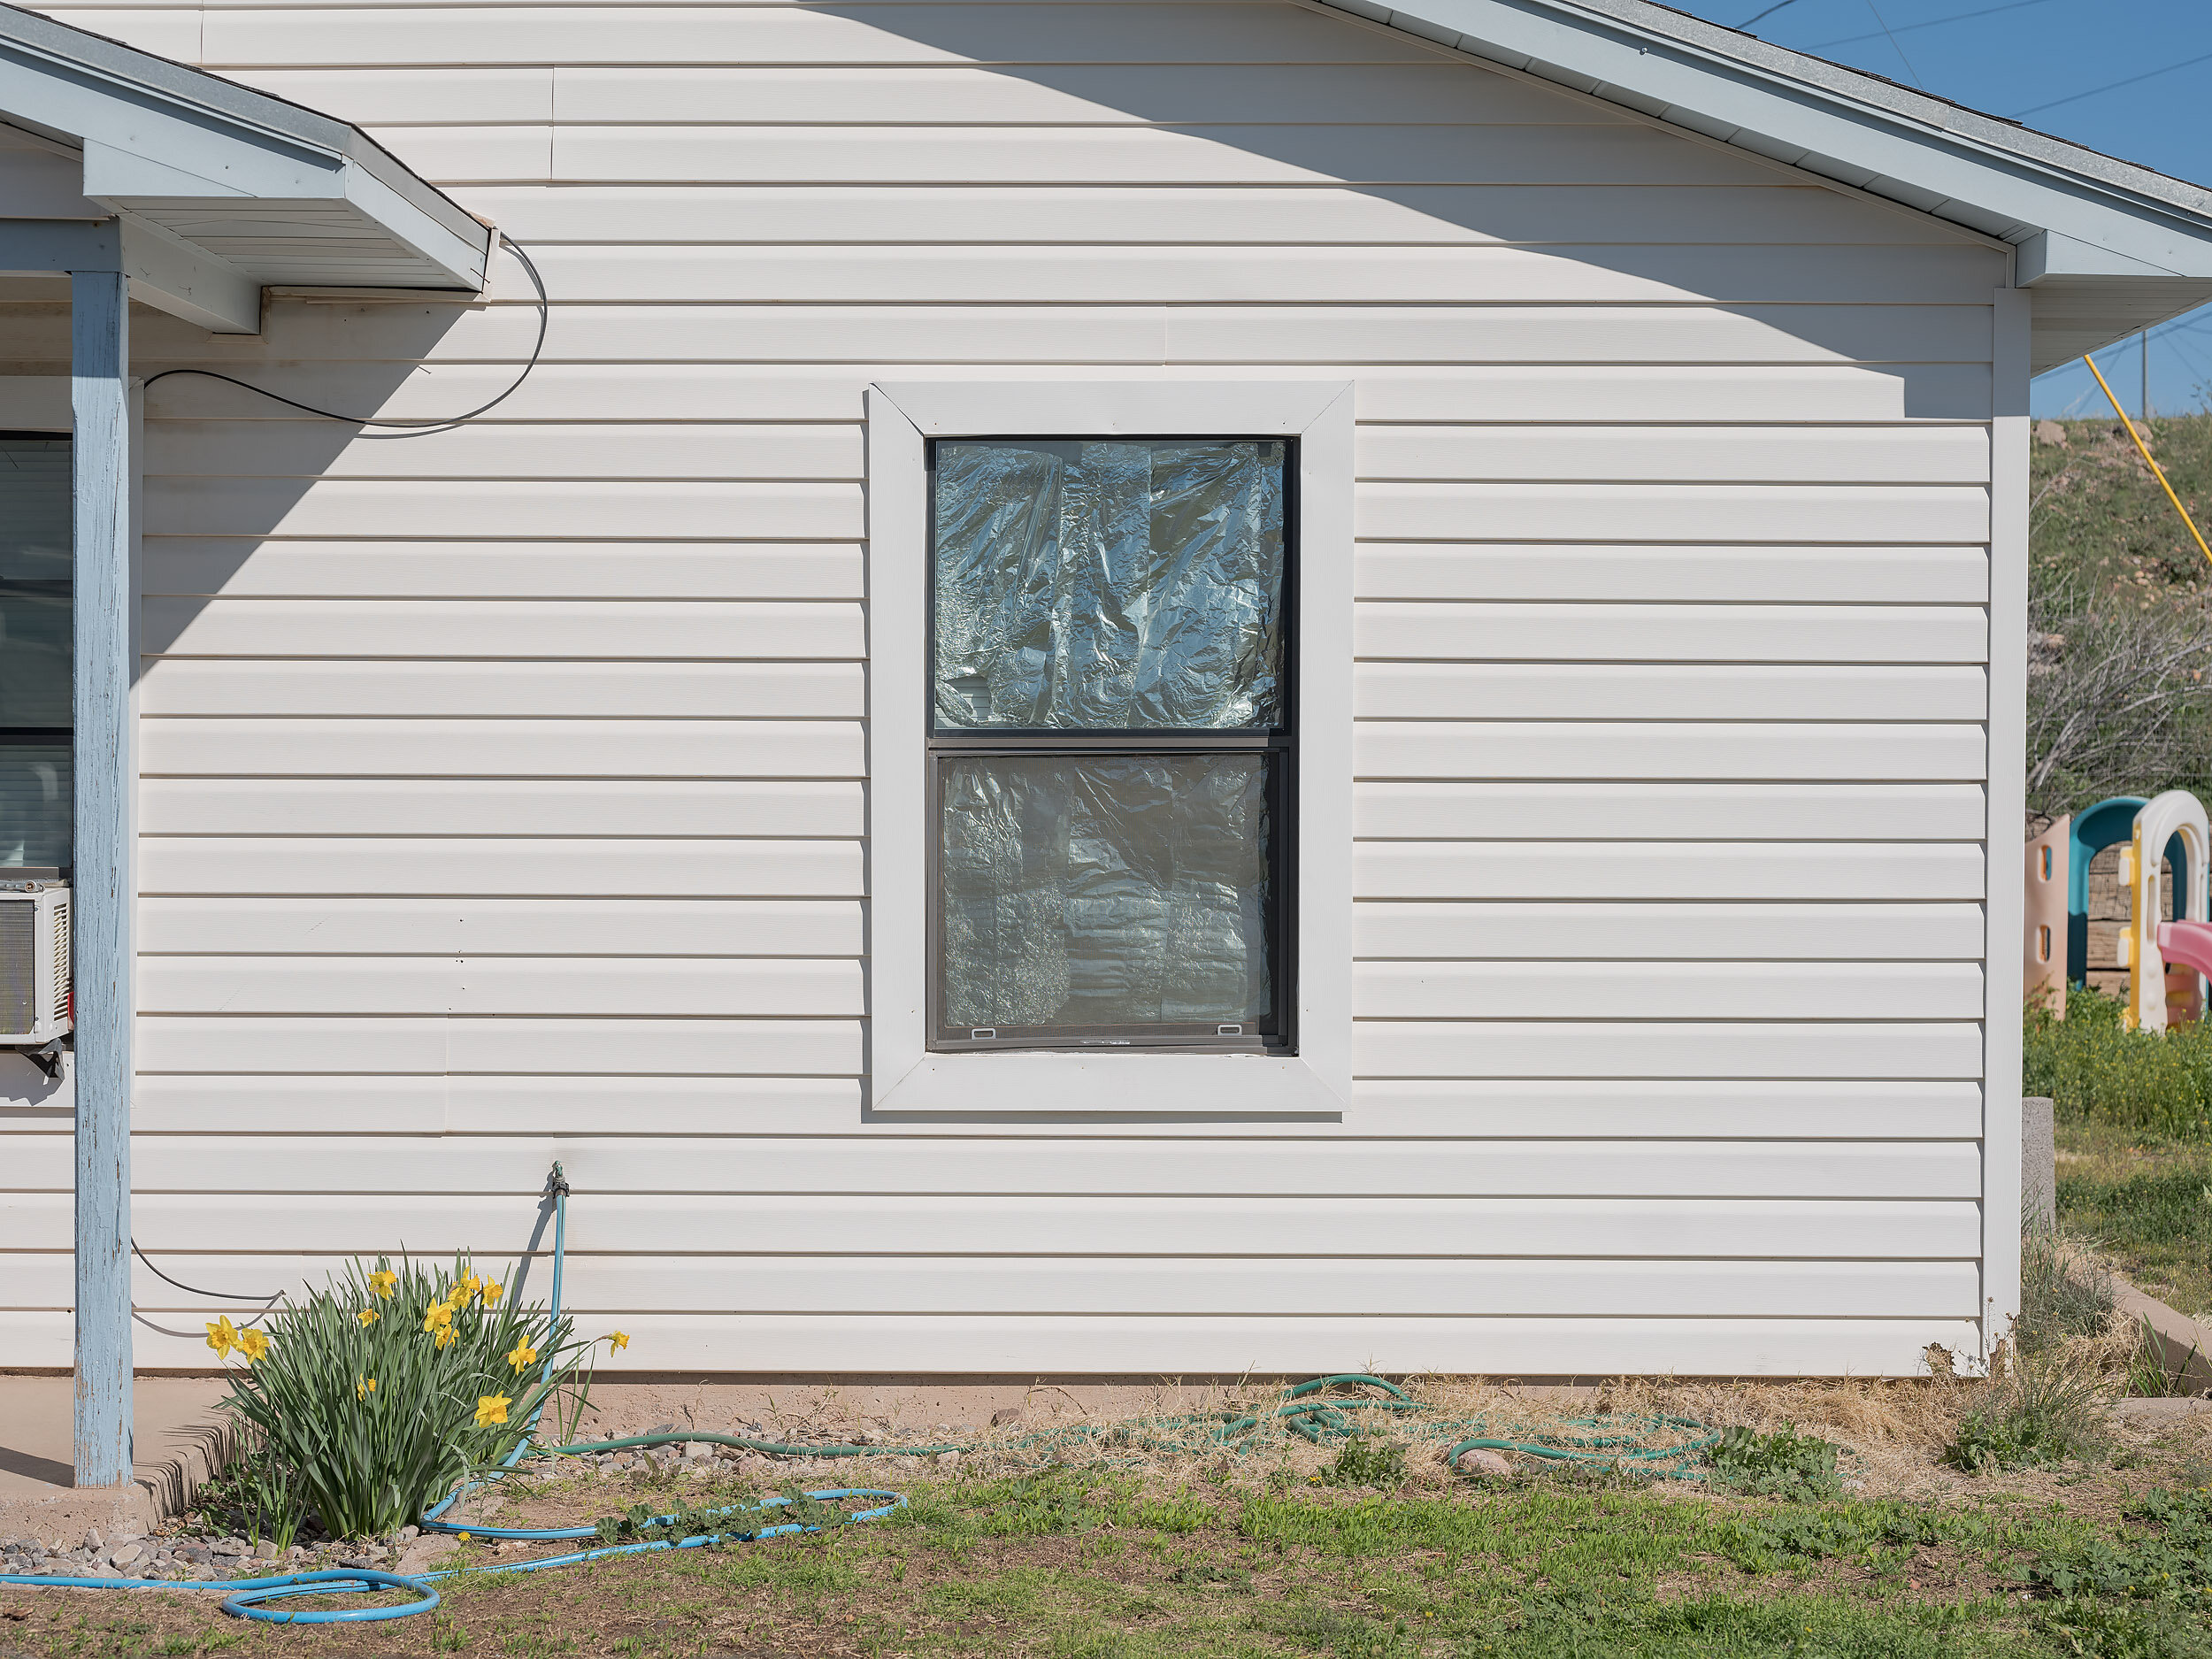 Common in Morenci foiled-windows to block the Arizona sun. Freeport-McMoran operates the mine 24/7, necessitating shift work. Home Owners Associations (HOAs) often ban such window treatments.